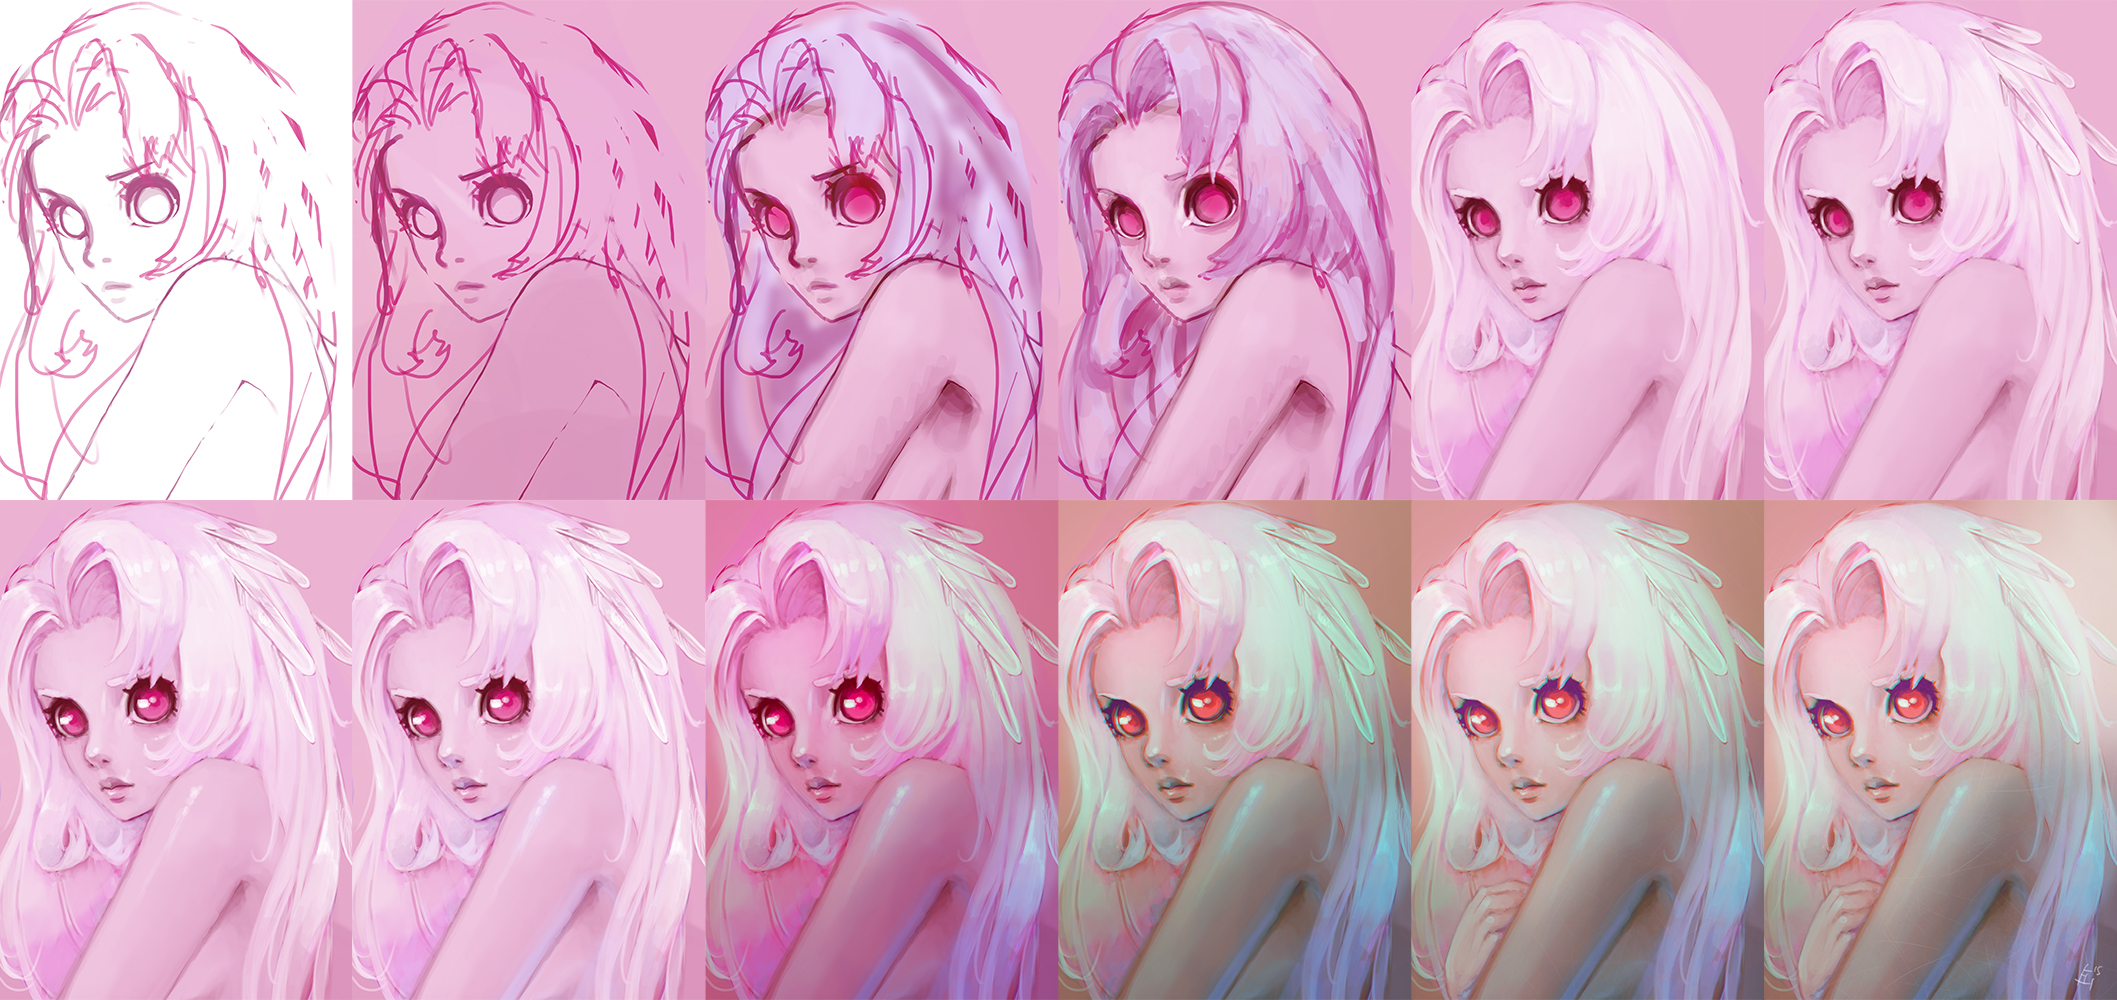 How to paint anime skin in different light sources by fhilippe124 - Make  better art